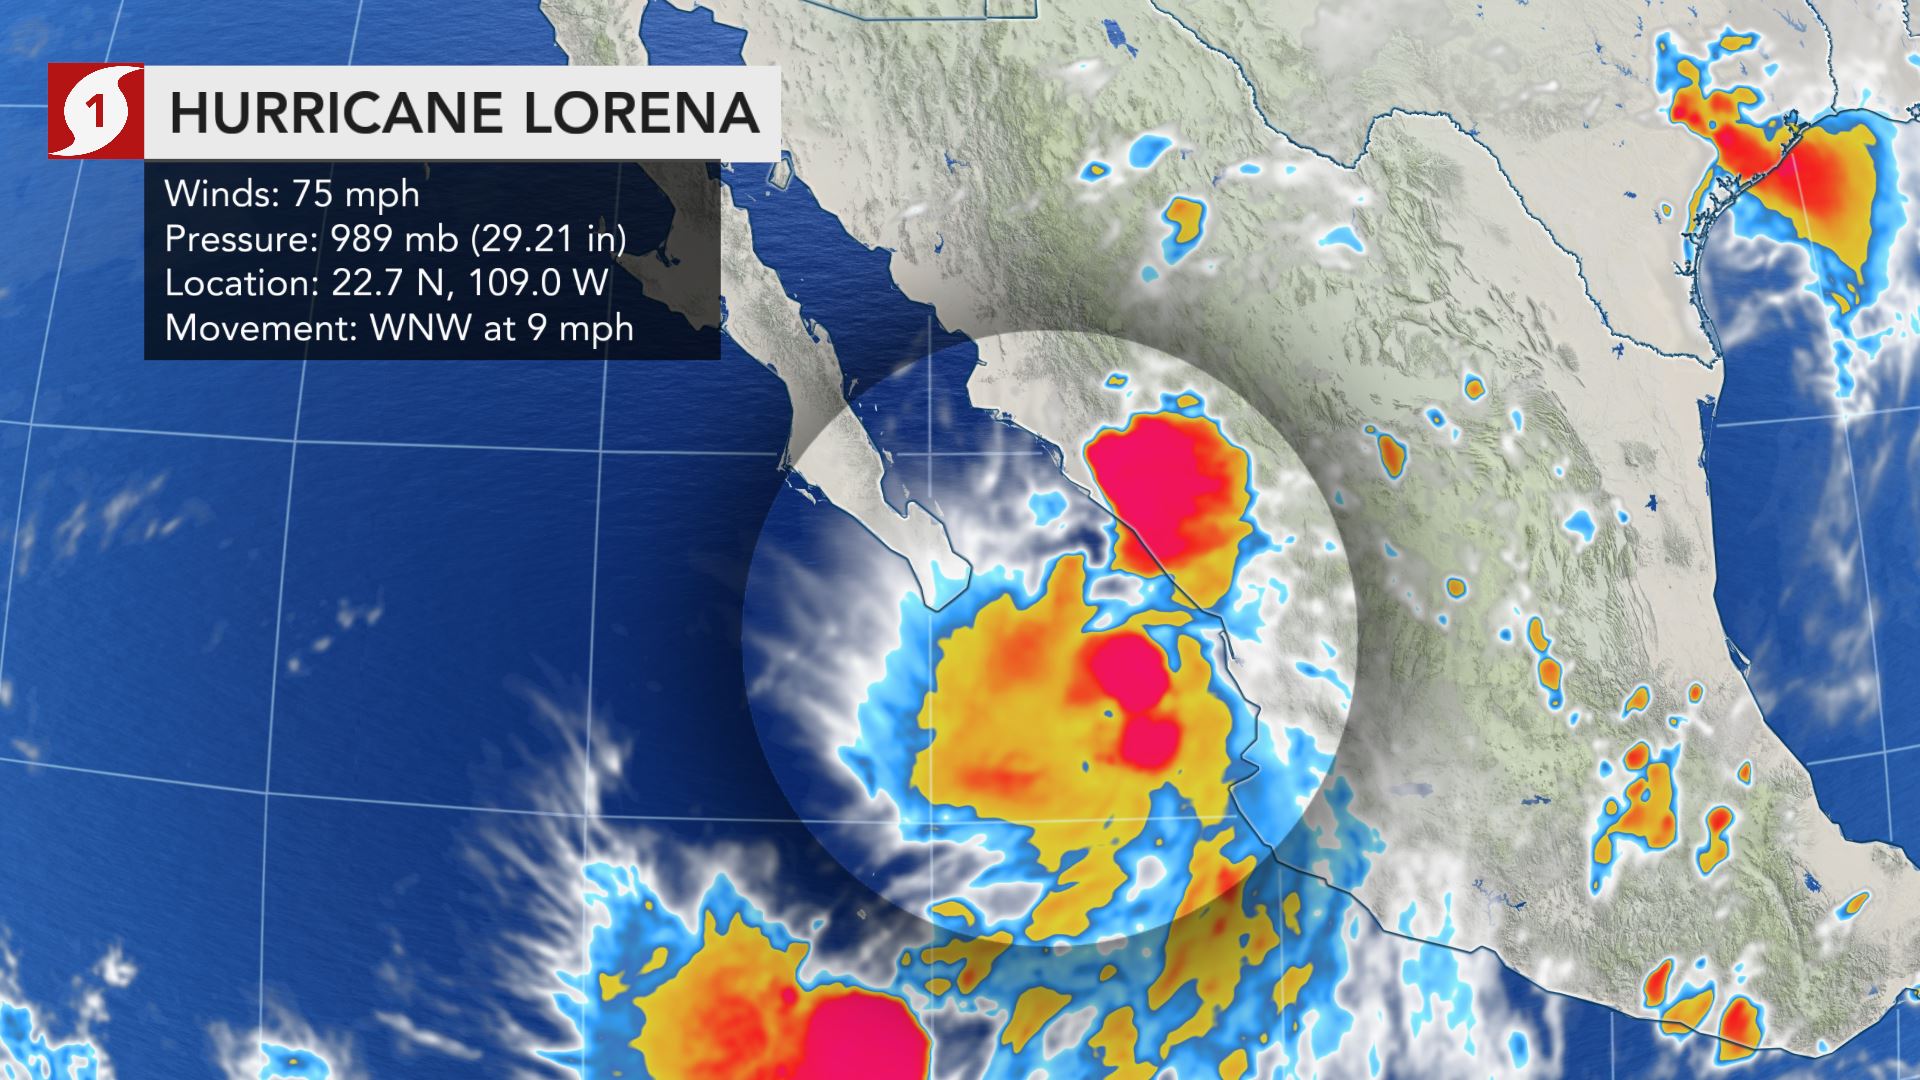 UPDATE 3-Hurricane Lorena drenches parts of Gulf of California, moves north of Mexico's Los Cabos